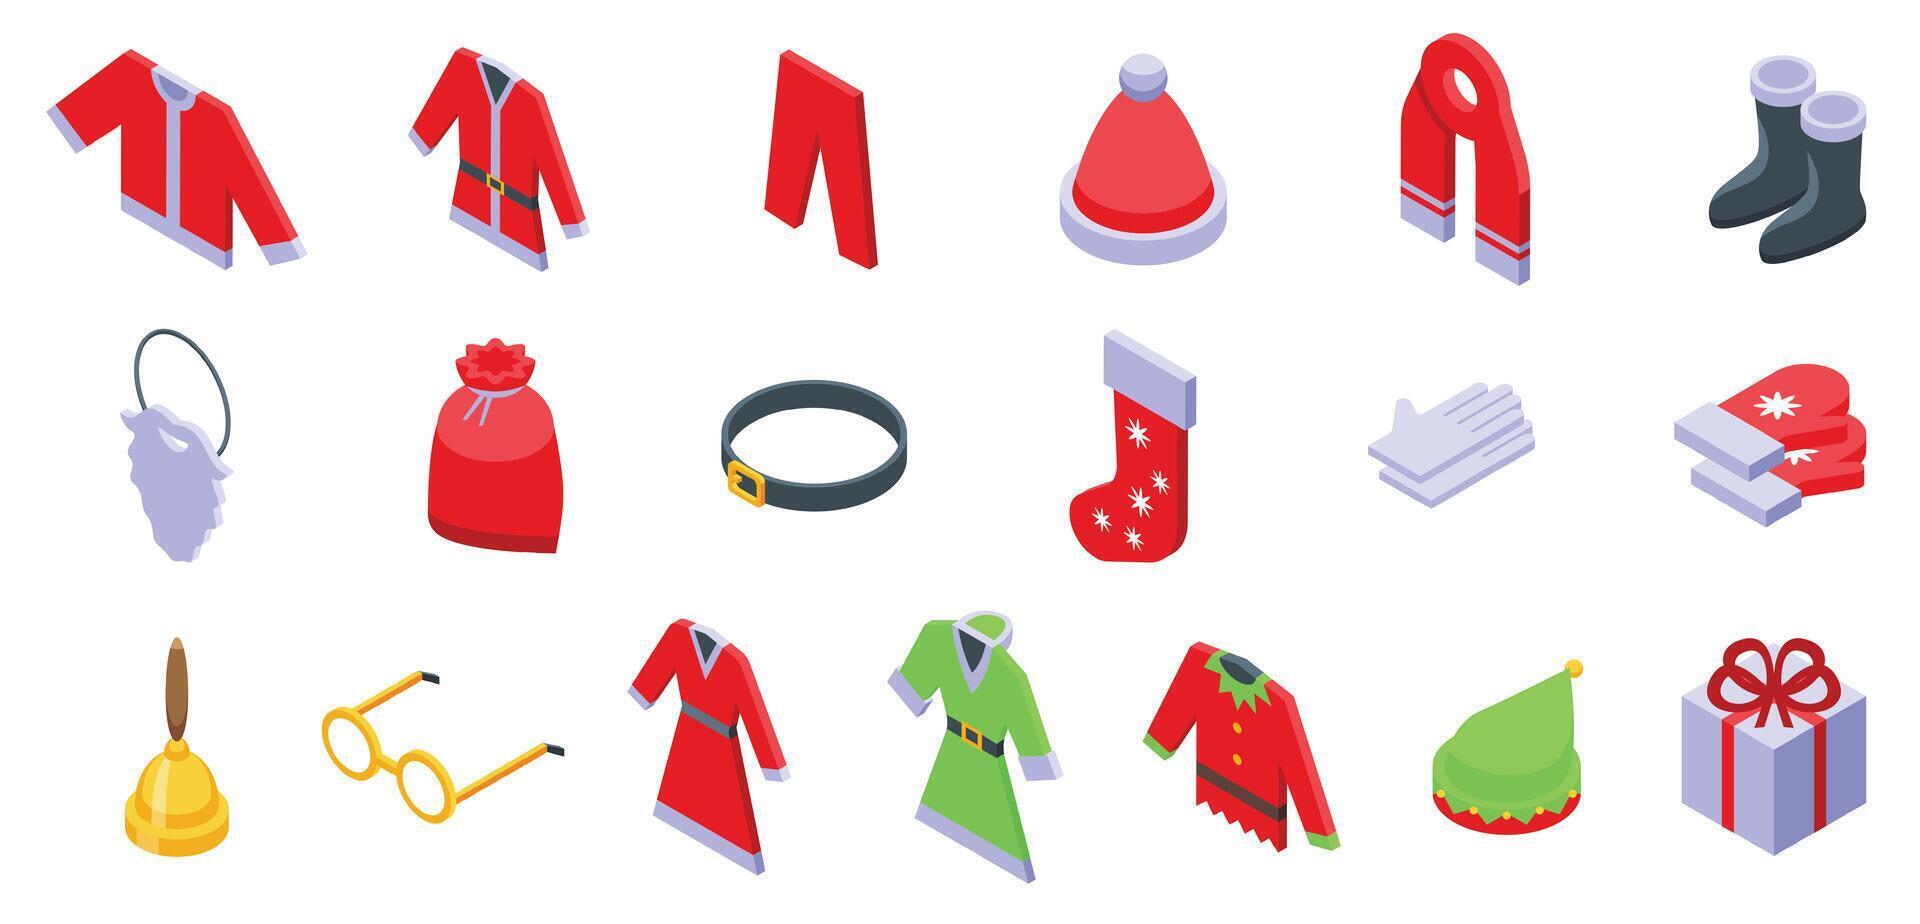 Claus dress suit icons set isometric vector. Santa jacket and bag vector